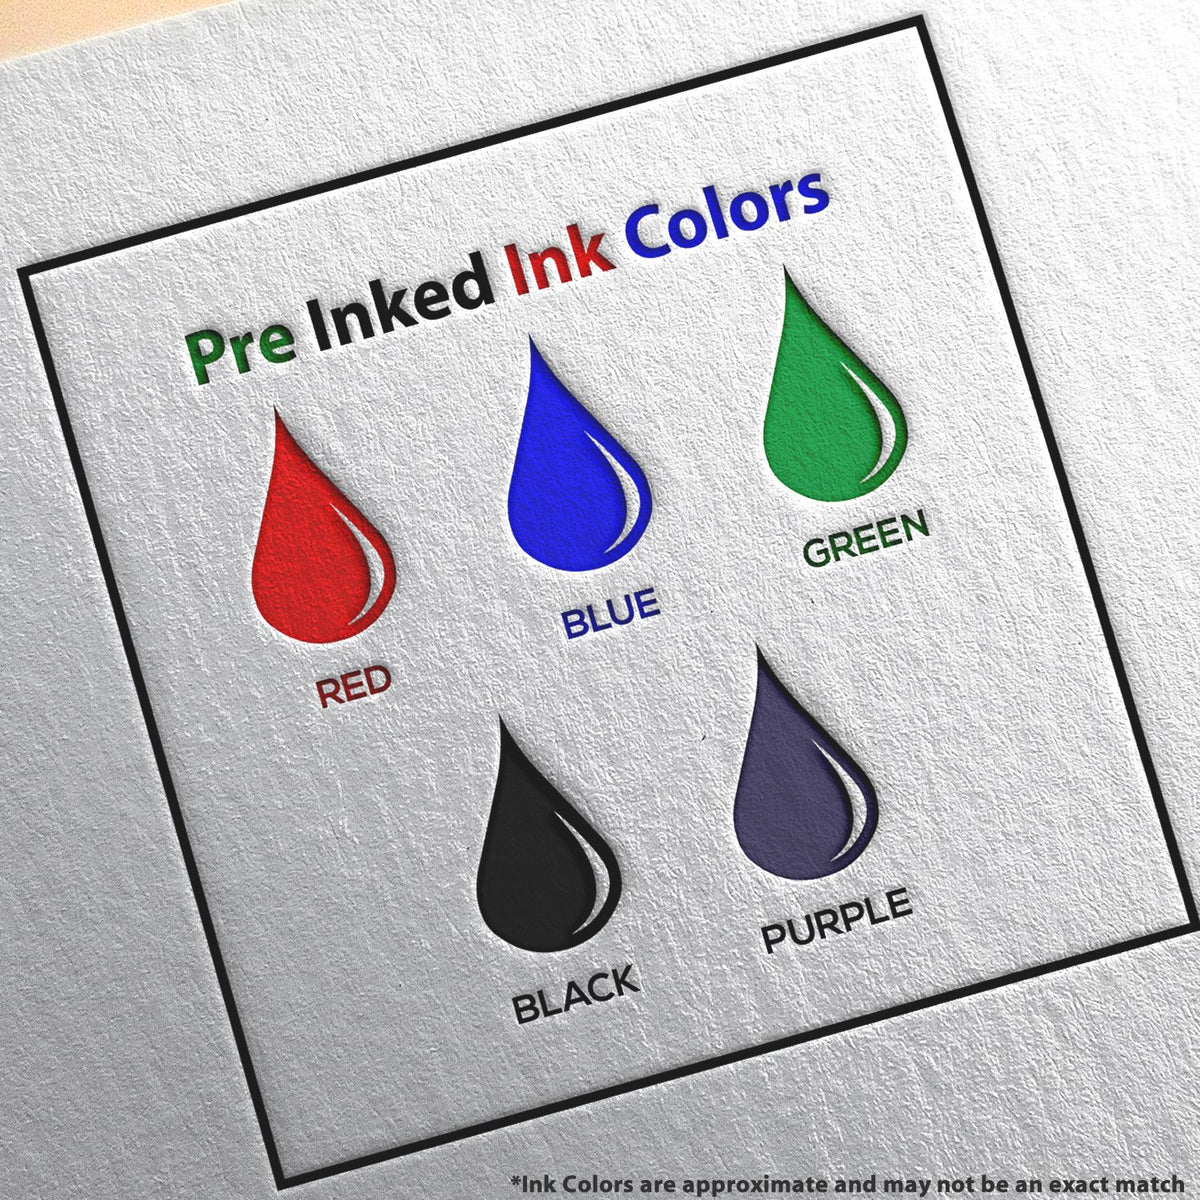 A picture showing the different ink colors or hues available for the Slim Pre-Inked Guam Landscape Architect Seal Stamp product.